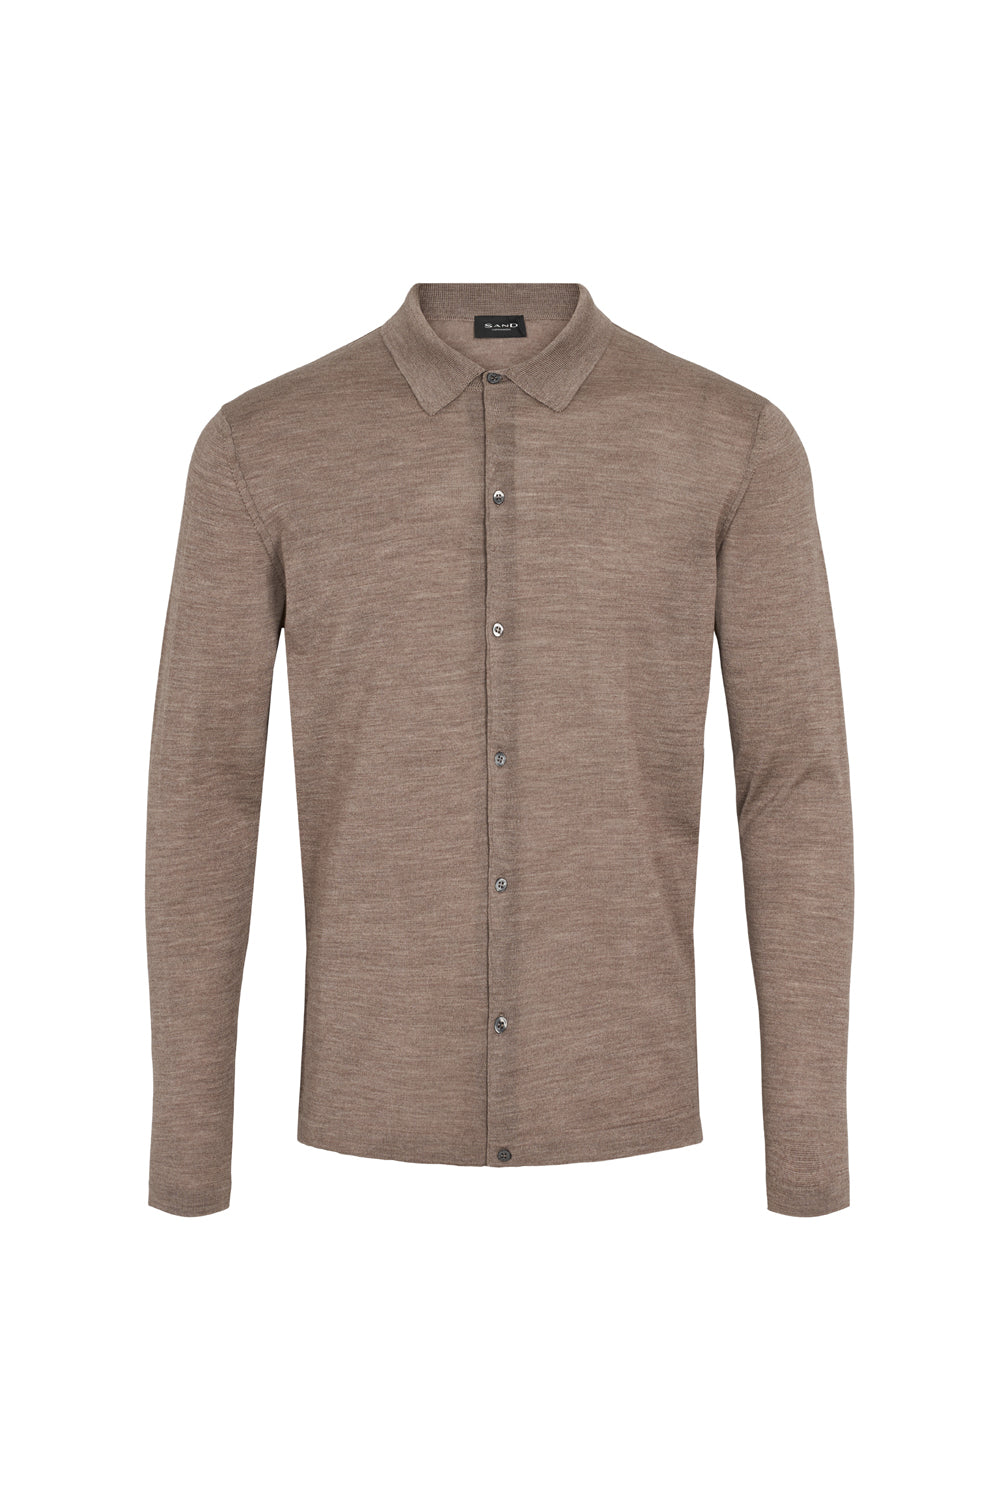 Buy the Sand Copenhagen Merino Ipolo L/S T-Shirt in Taupe at Intro. Spend £50 for free UK delivery. Official stockists. We ship worldwide.